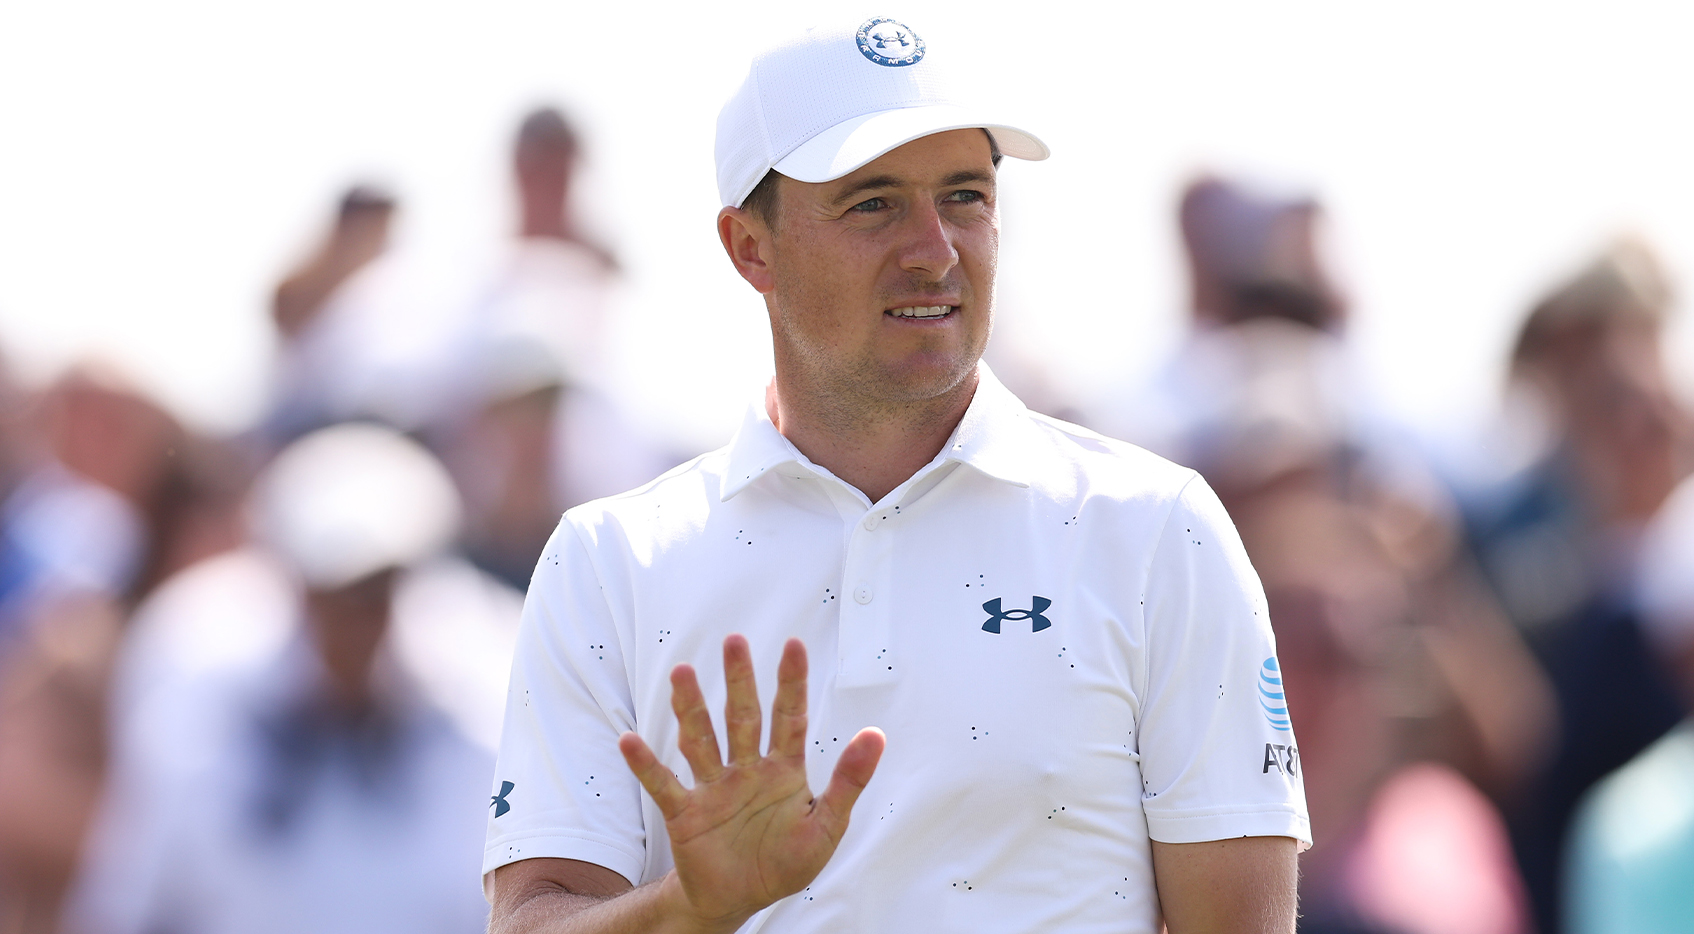 Jordan Spieth Net Worth - A Look At The Golfer's Fortune